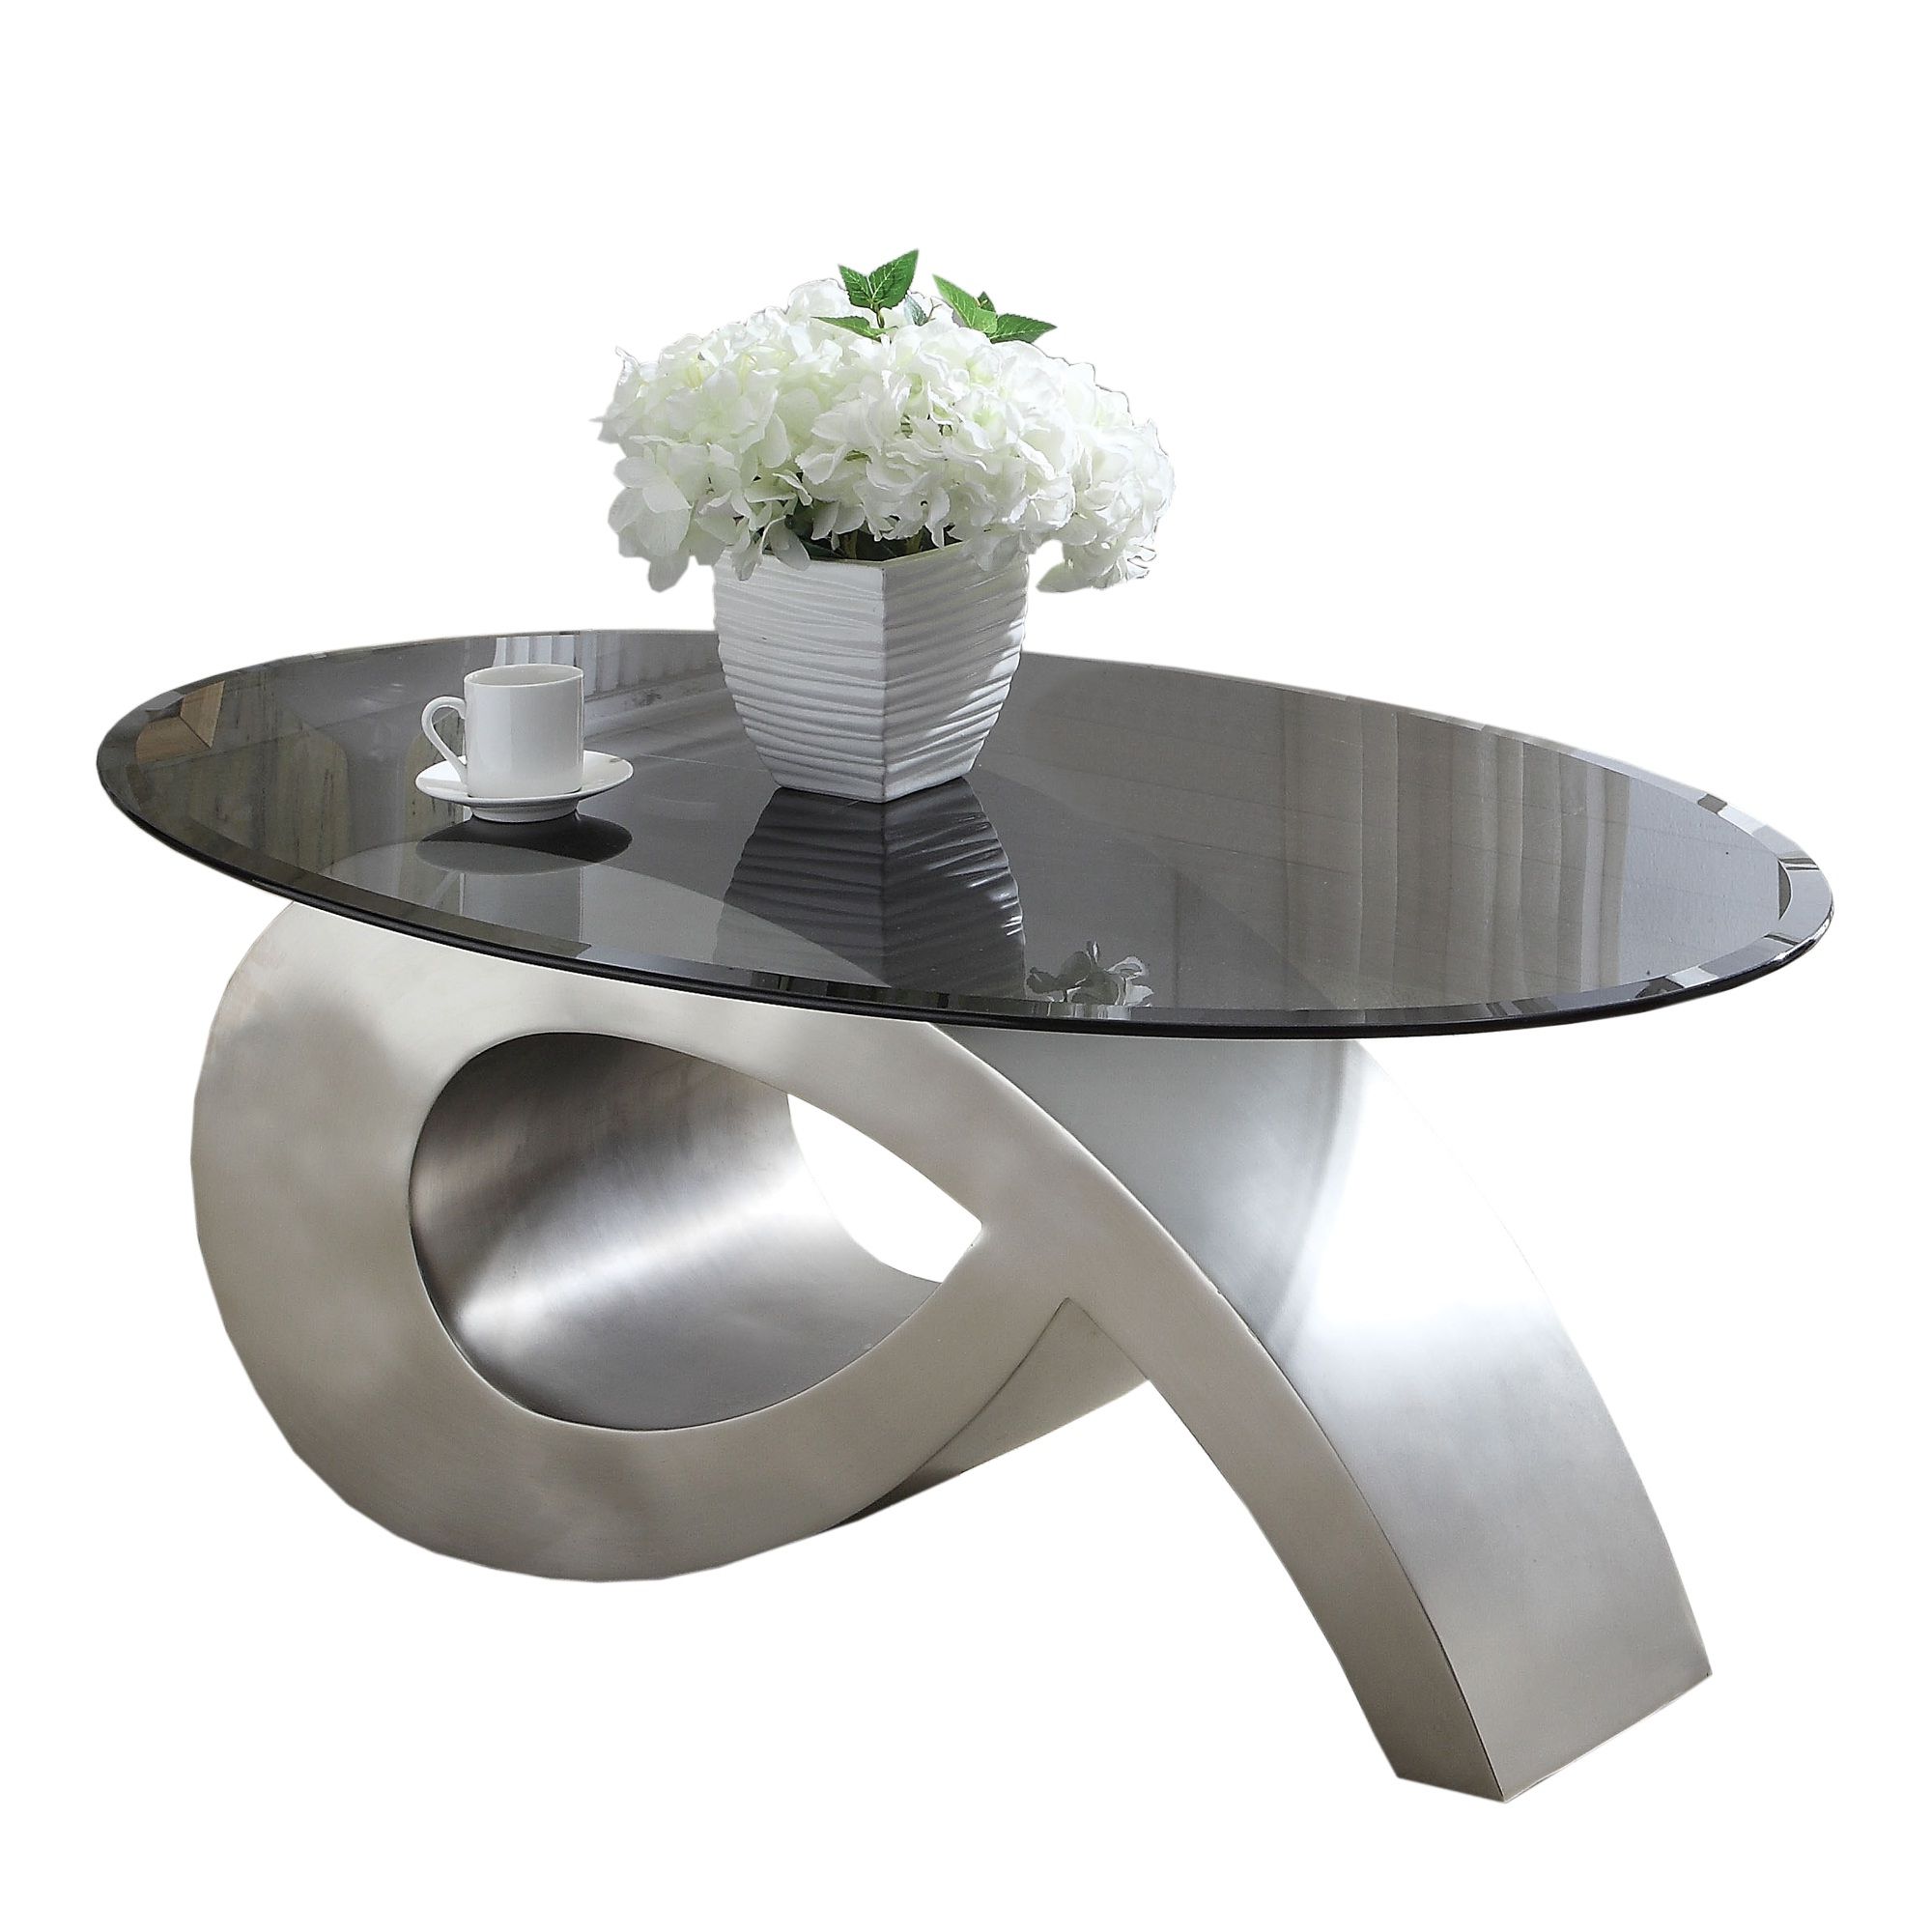 Most Popular Oval Glass Coffee Table With Unique Metal Base, Black And Inside Silver Coffee Tables (View 12 of 20)